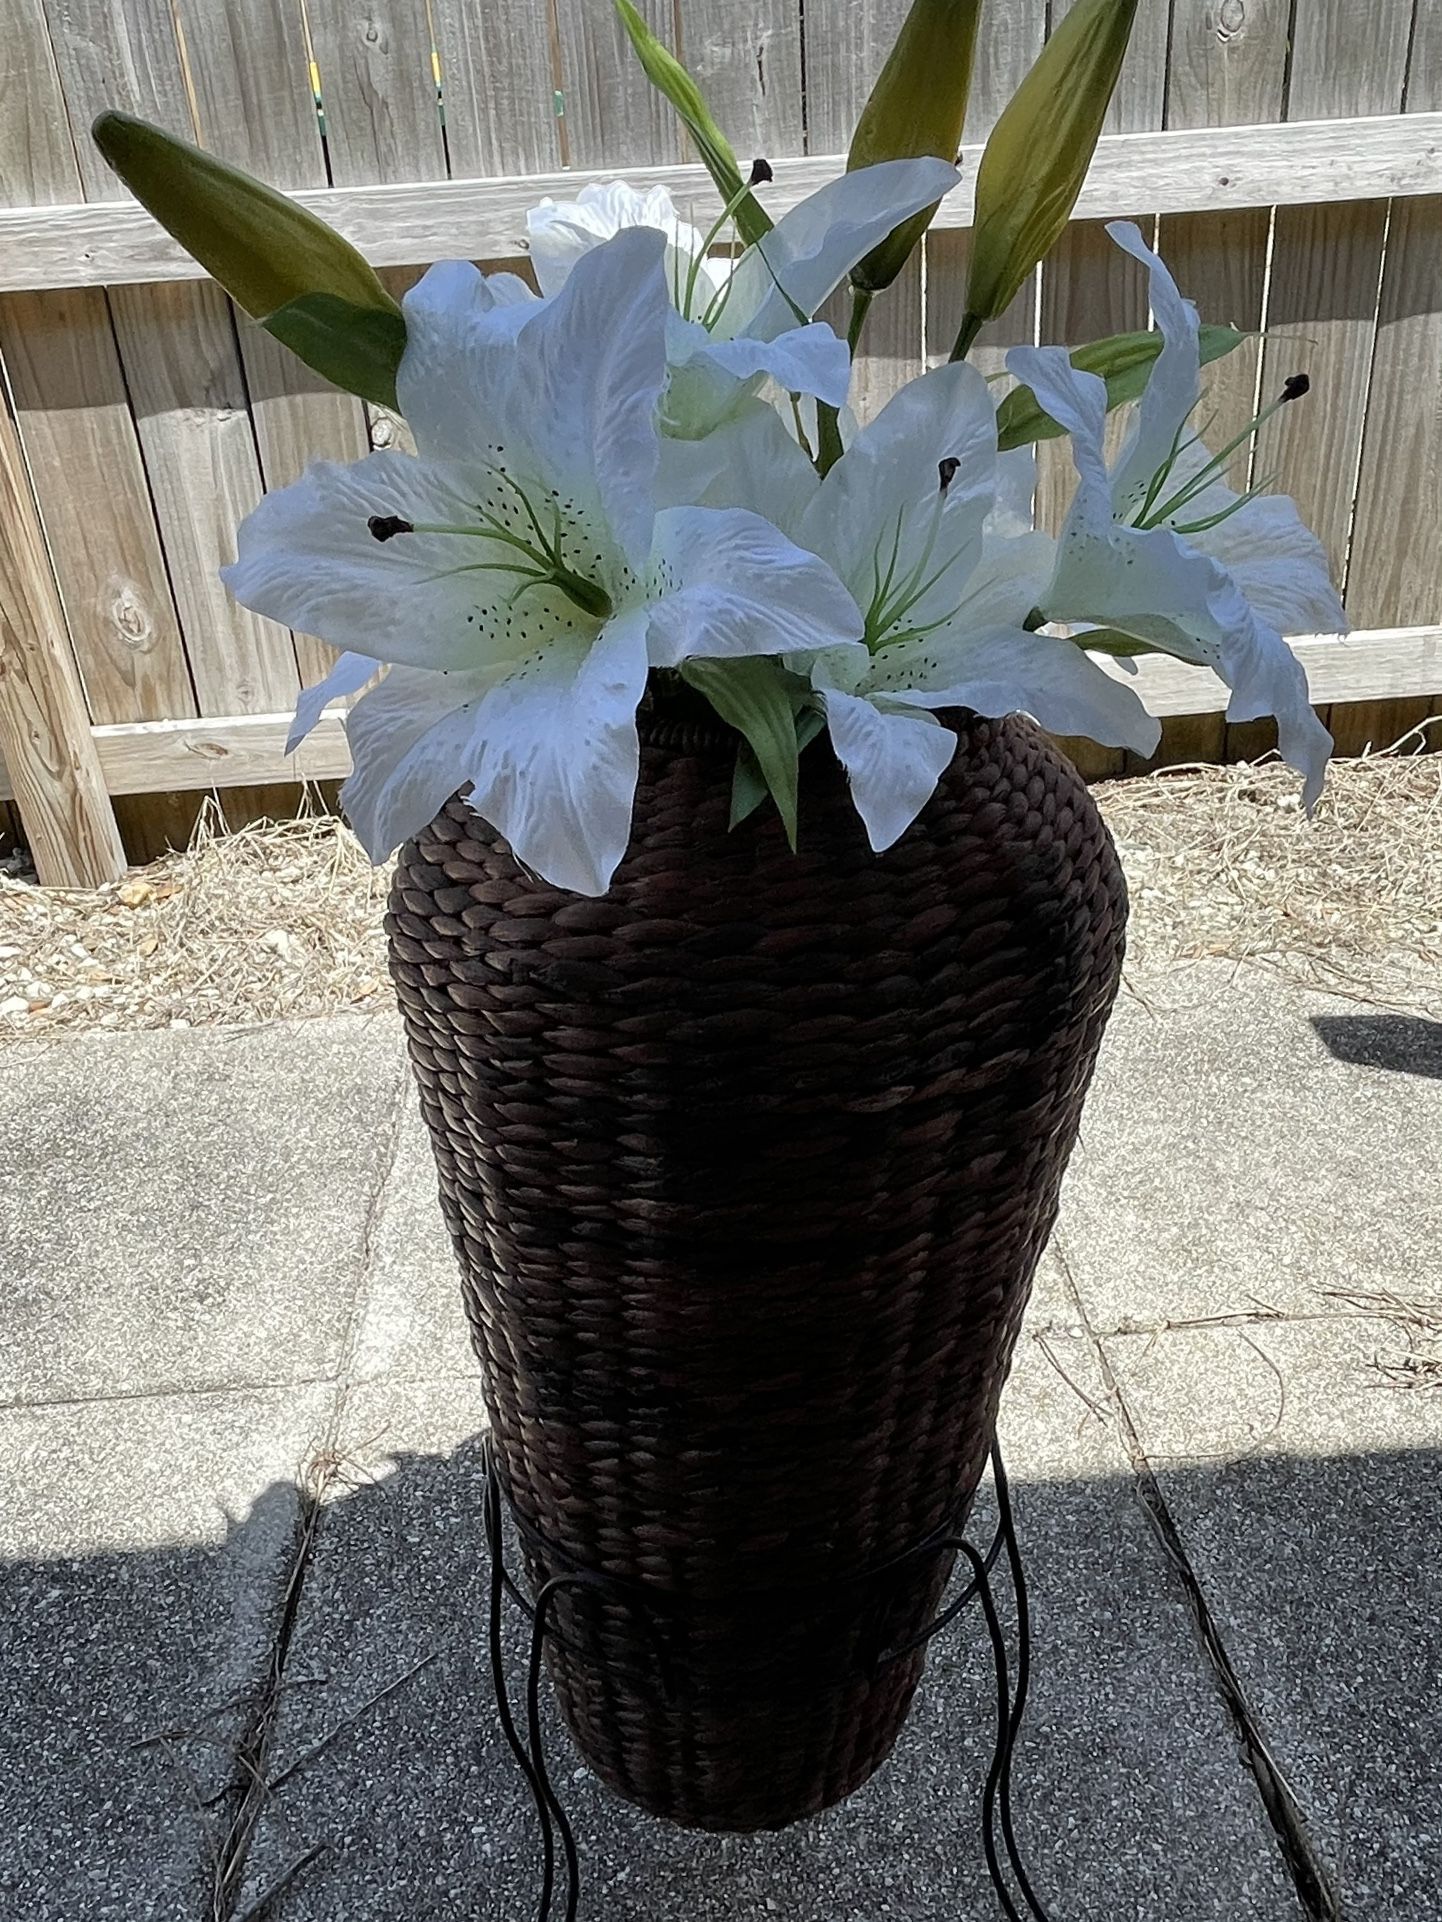 4ft Huge Lilly Flower Arrangement With Vase And Stand